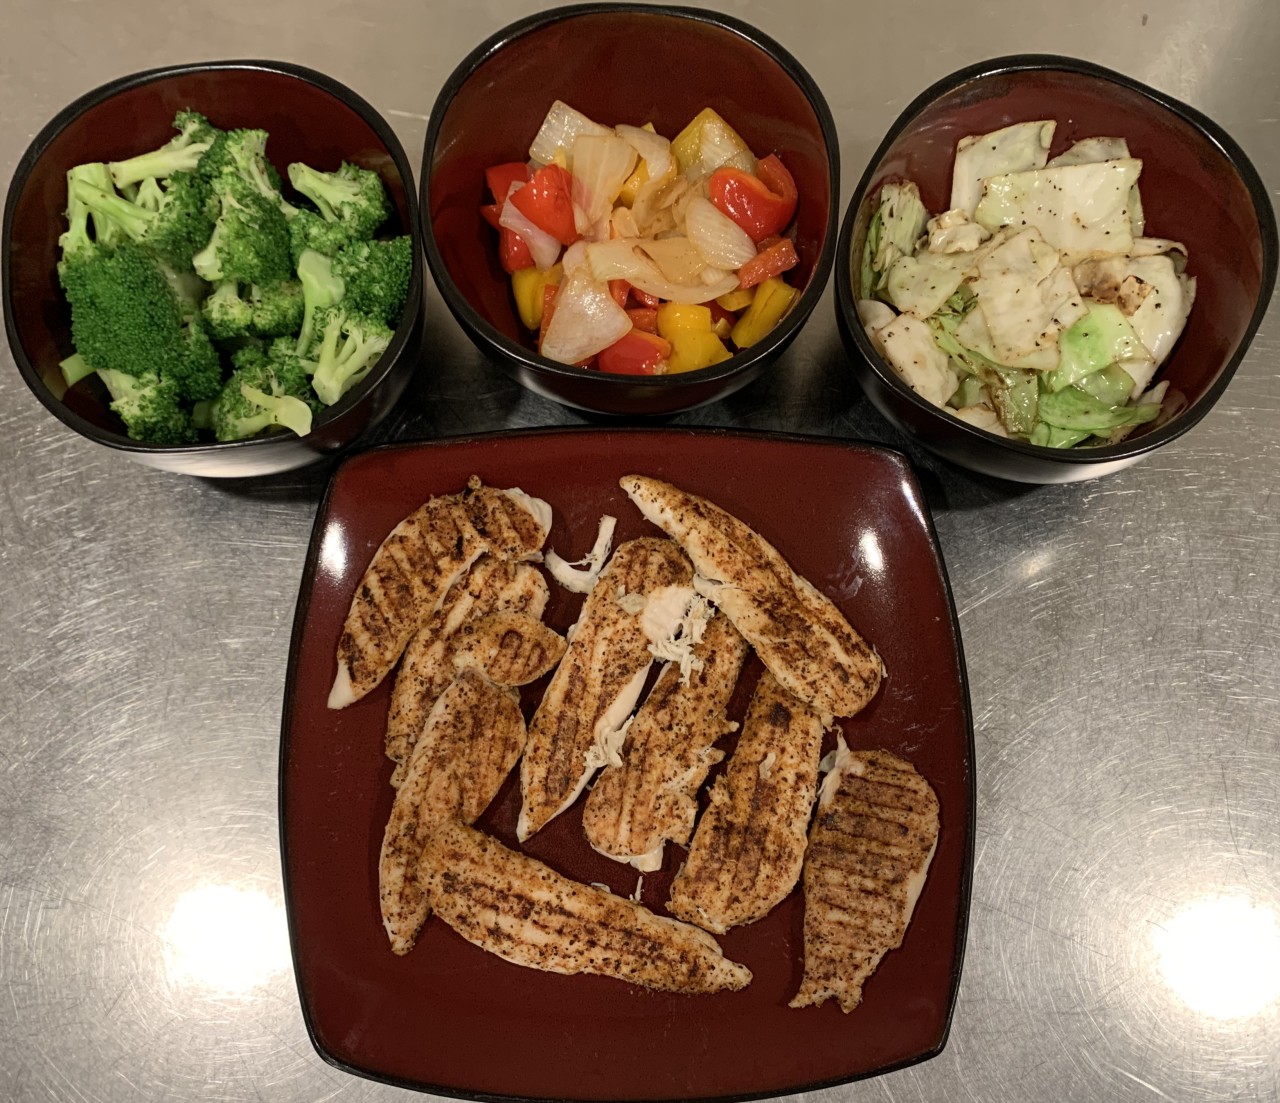 <a class="bx-tag" rel="tag" href="https://streetloc.com/view-channel-profile/whatsfordinner"><s>#</s><b>whatsfordinner</b></a> Grilled Chicken Tenders, Sautéed Onion and Bell Pepper; Sautéed Cabbage, and Steamed Broccoli